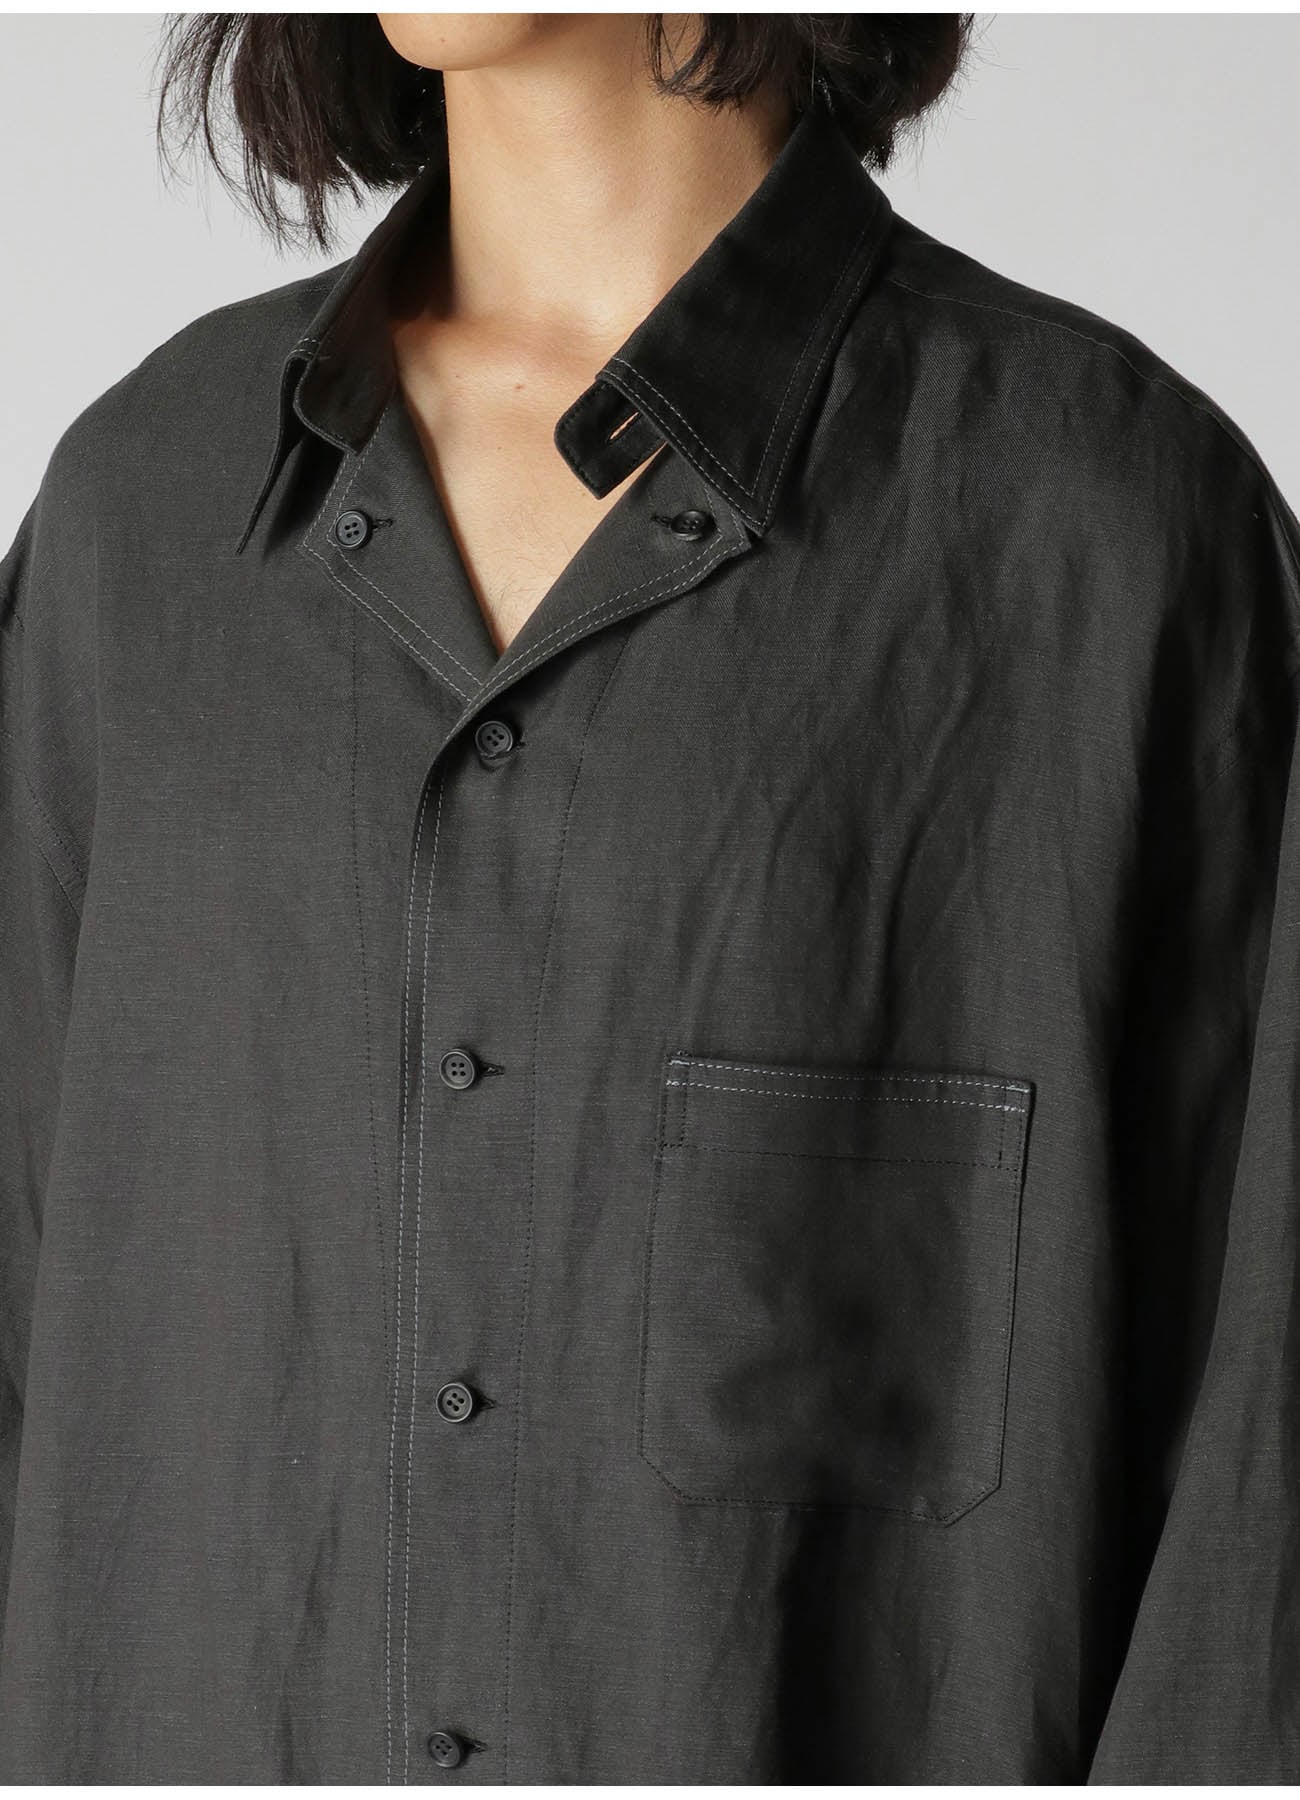 LYOCELL LINEN TWILL SHIRT WITH DESIGN COLLAR AND COLOR STITCH